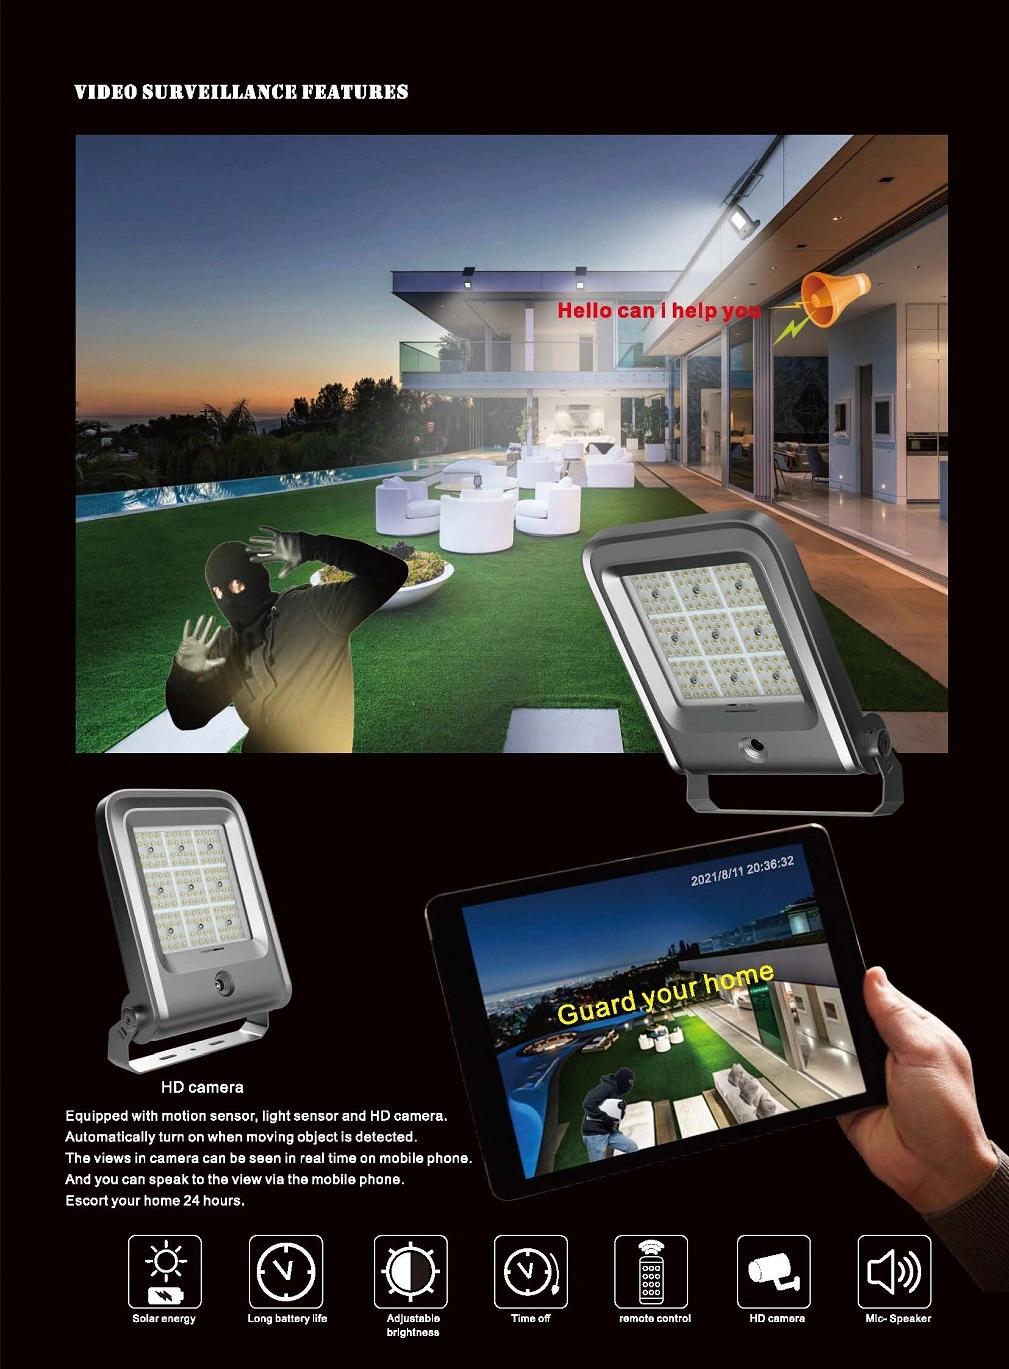 Exterior Wall Lights Fixtures Outdoor Solar LED Wall Sconces 12W Modern with Motion Sensor